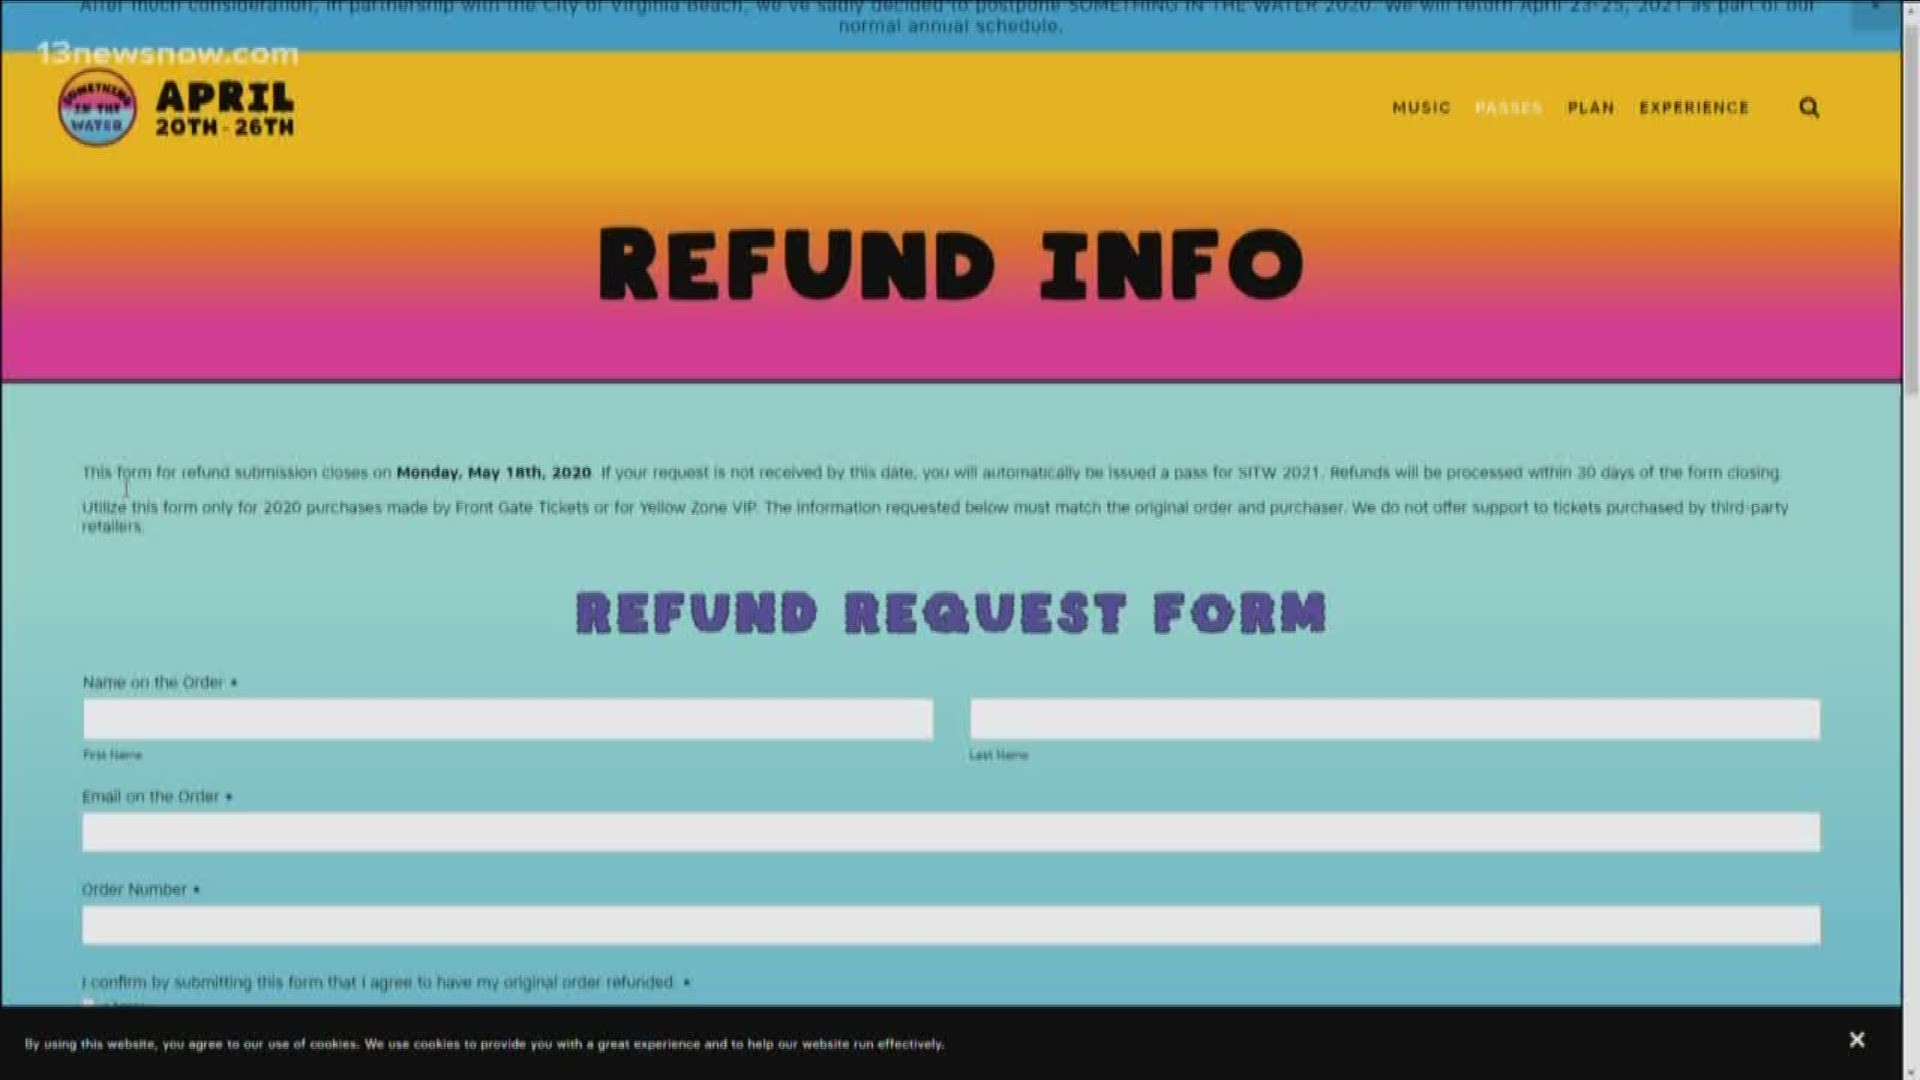 You have until May 20 to put your refund request submission in.